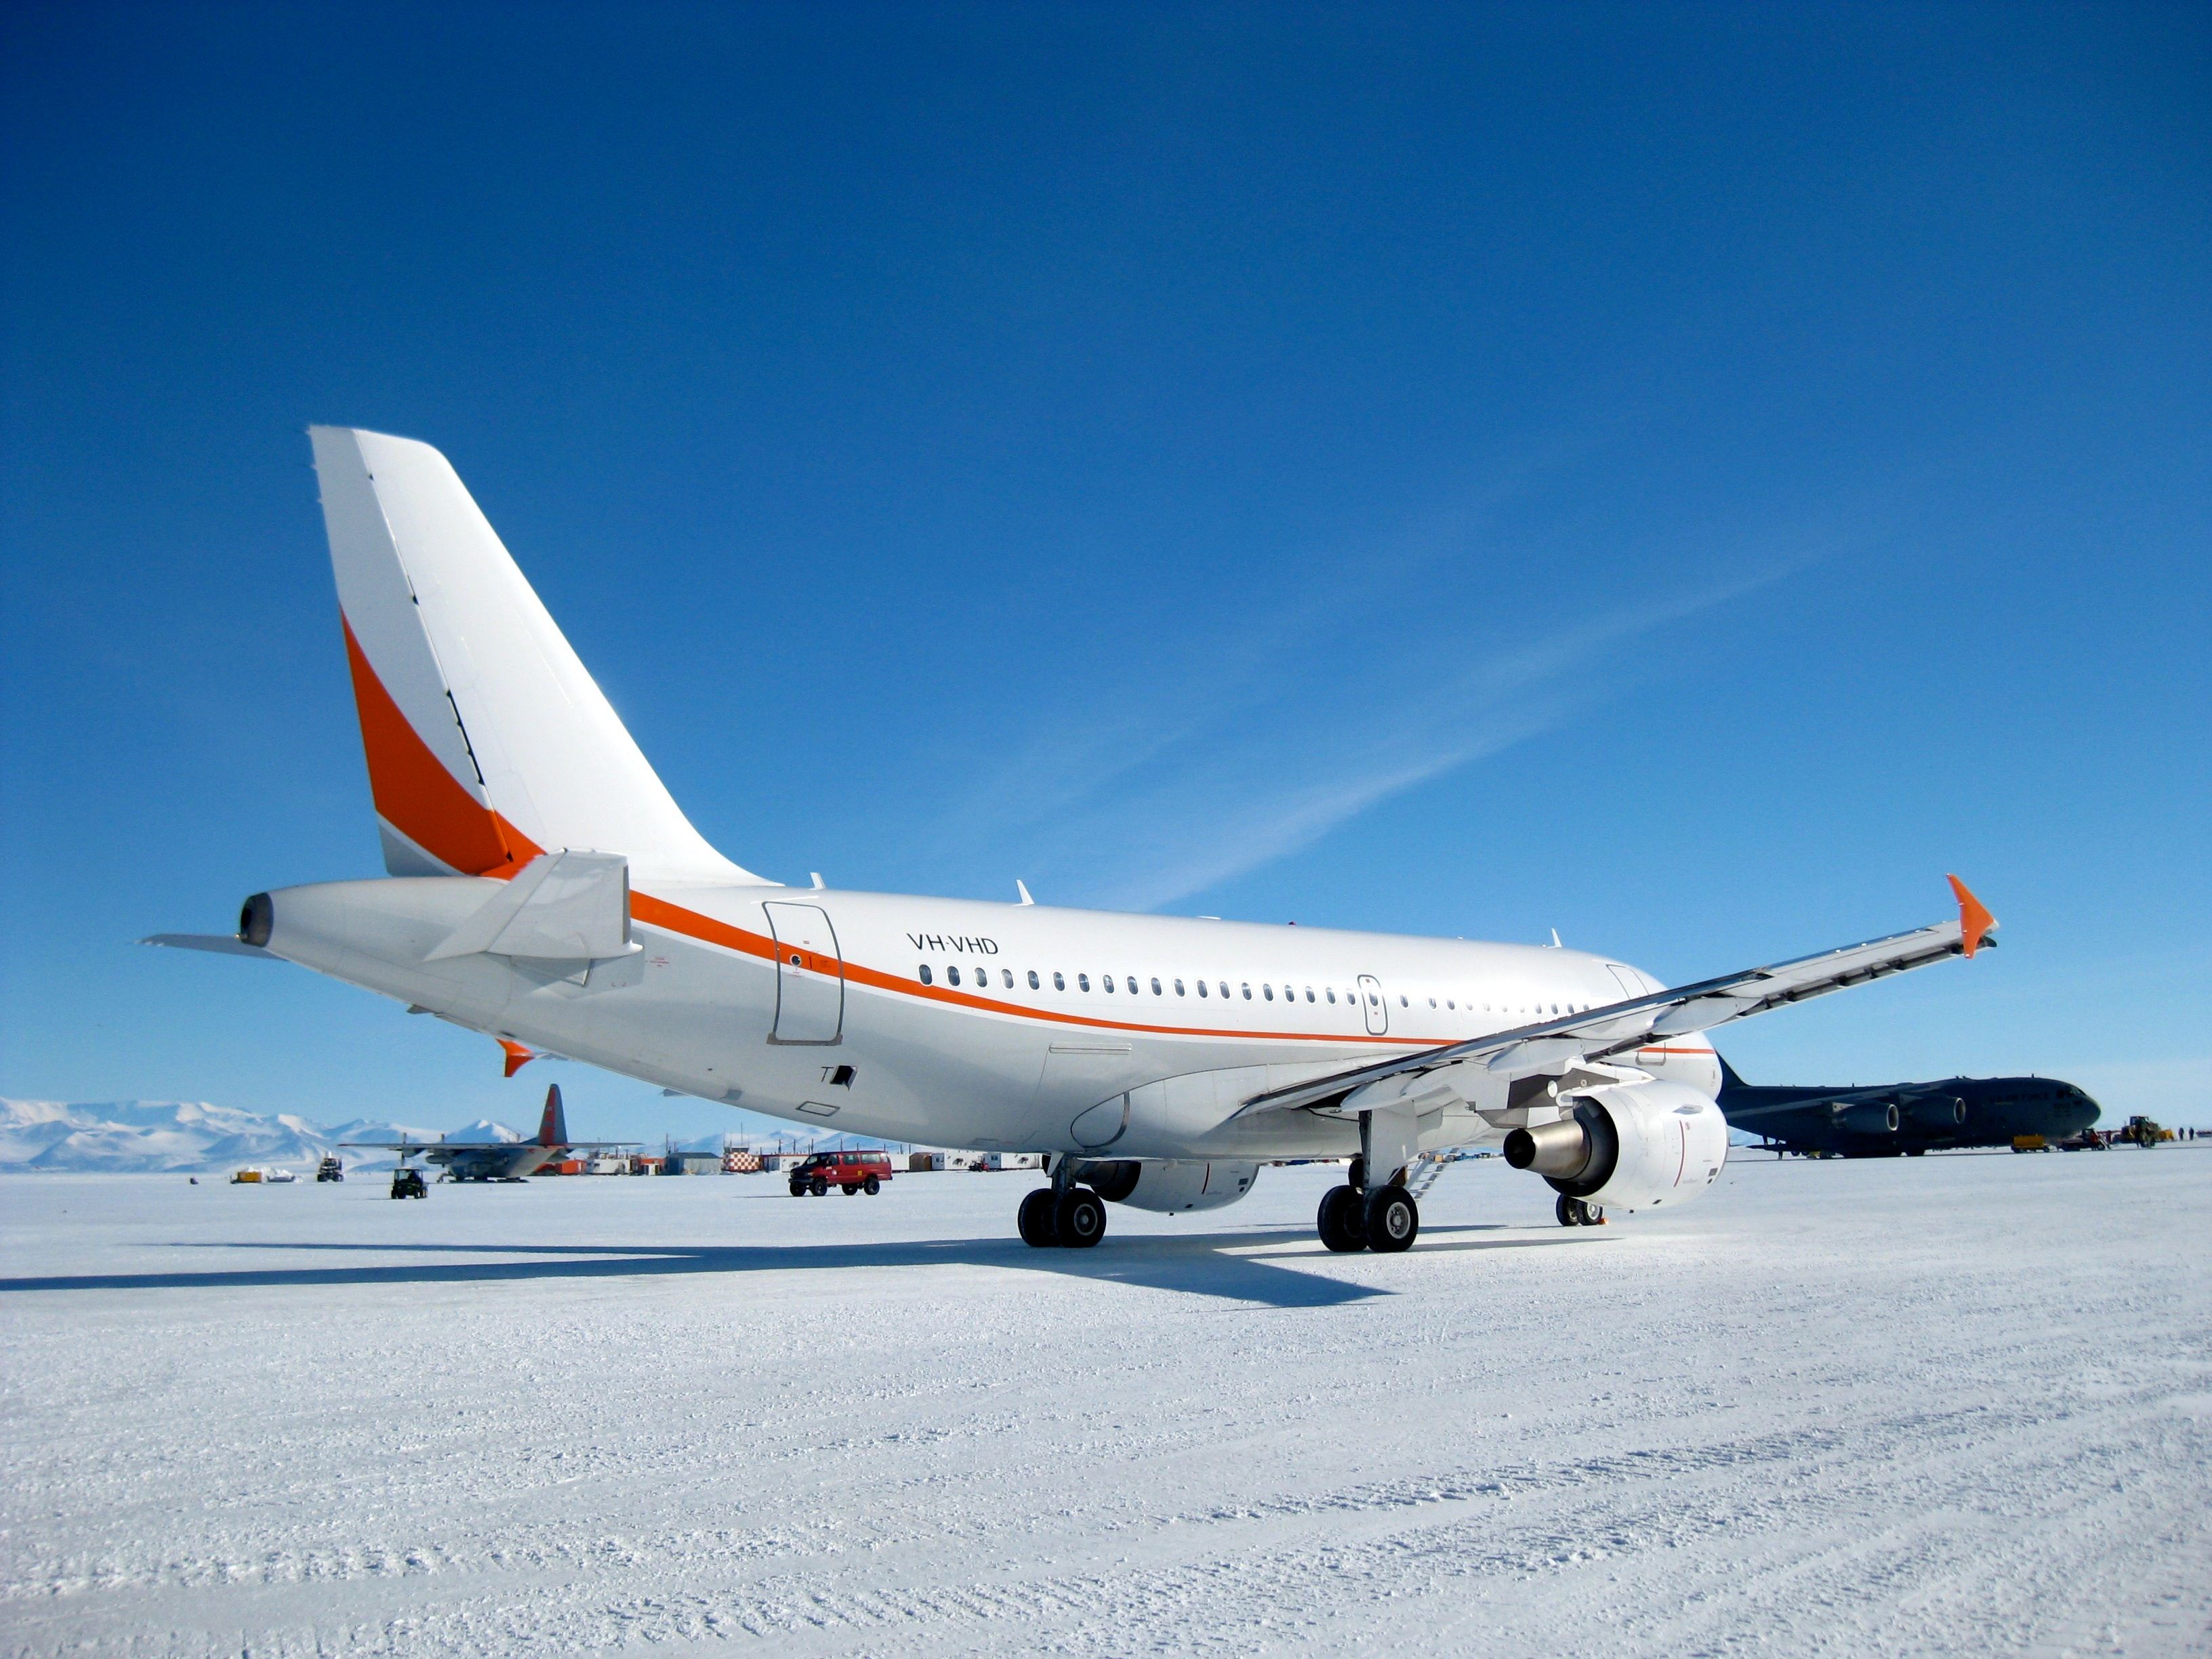 A Skytraders Airbus A319 on the ground in Antarctica.